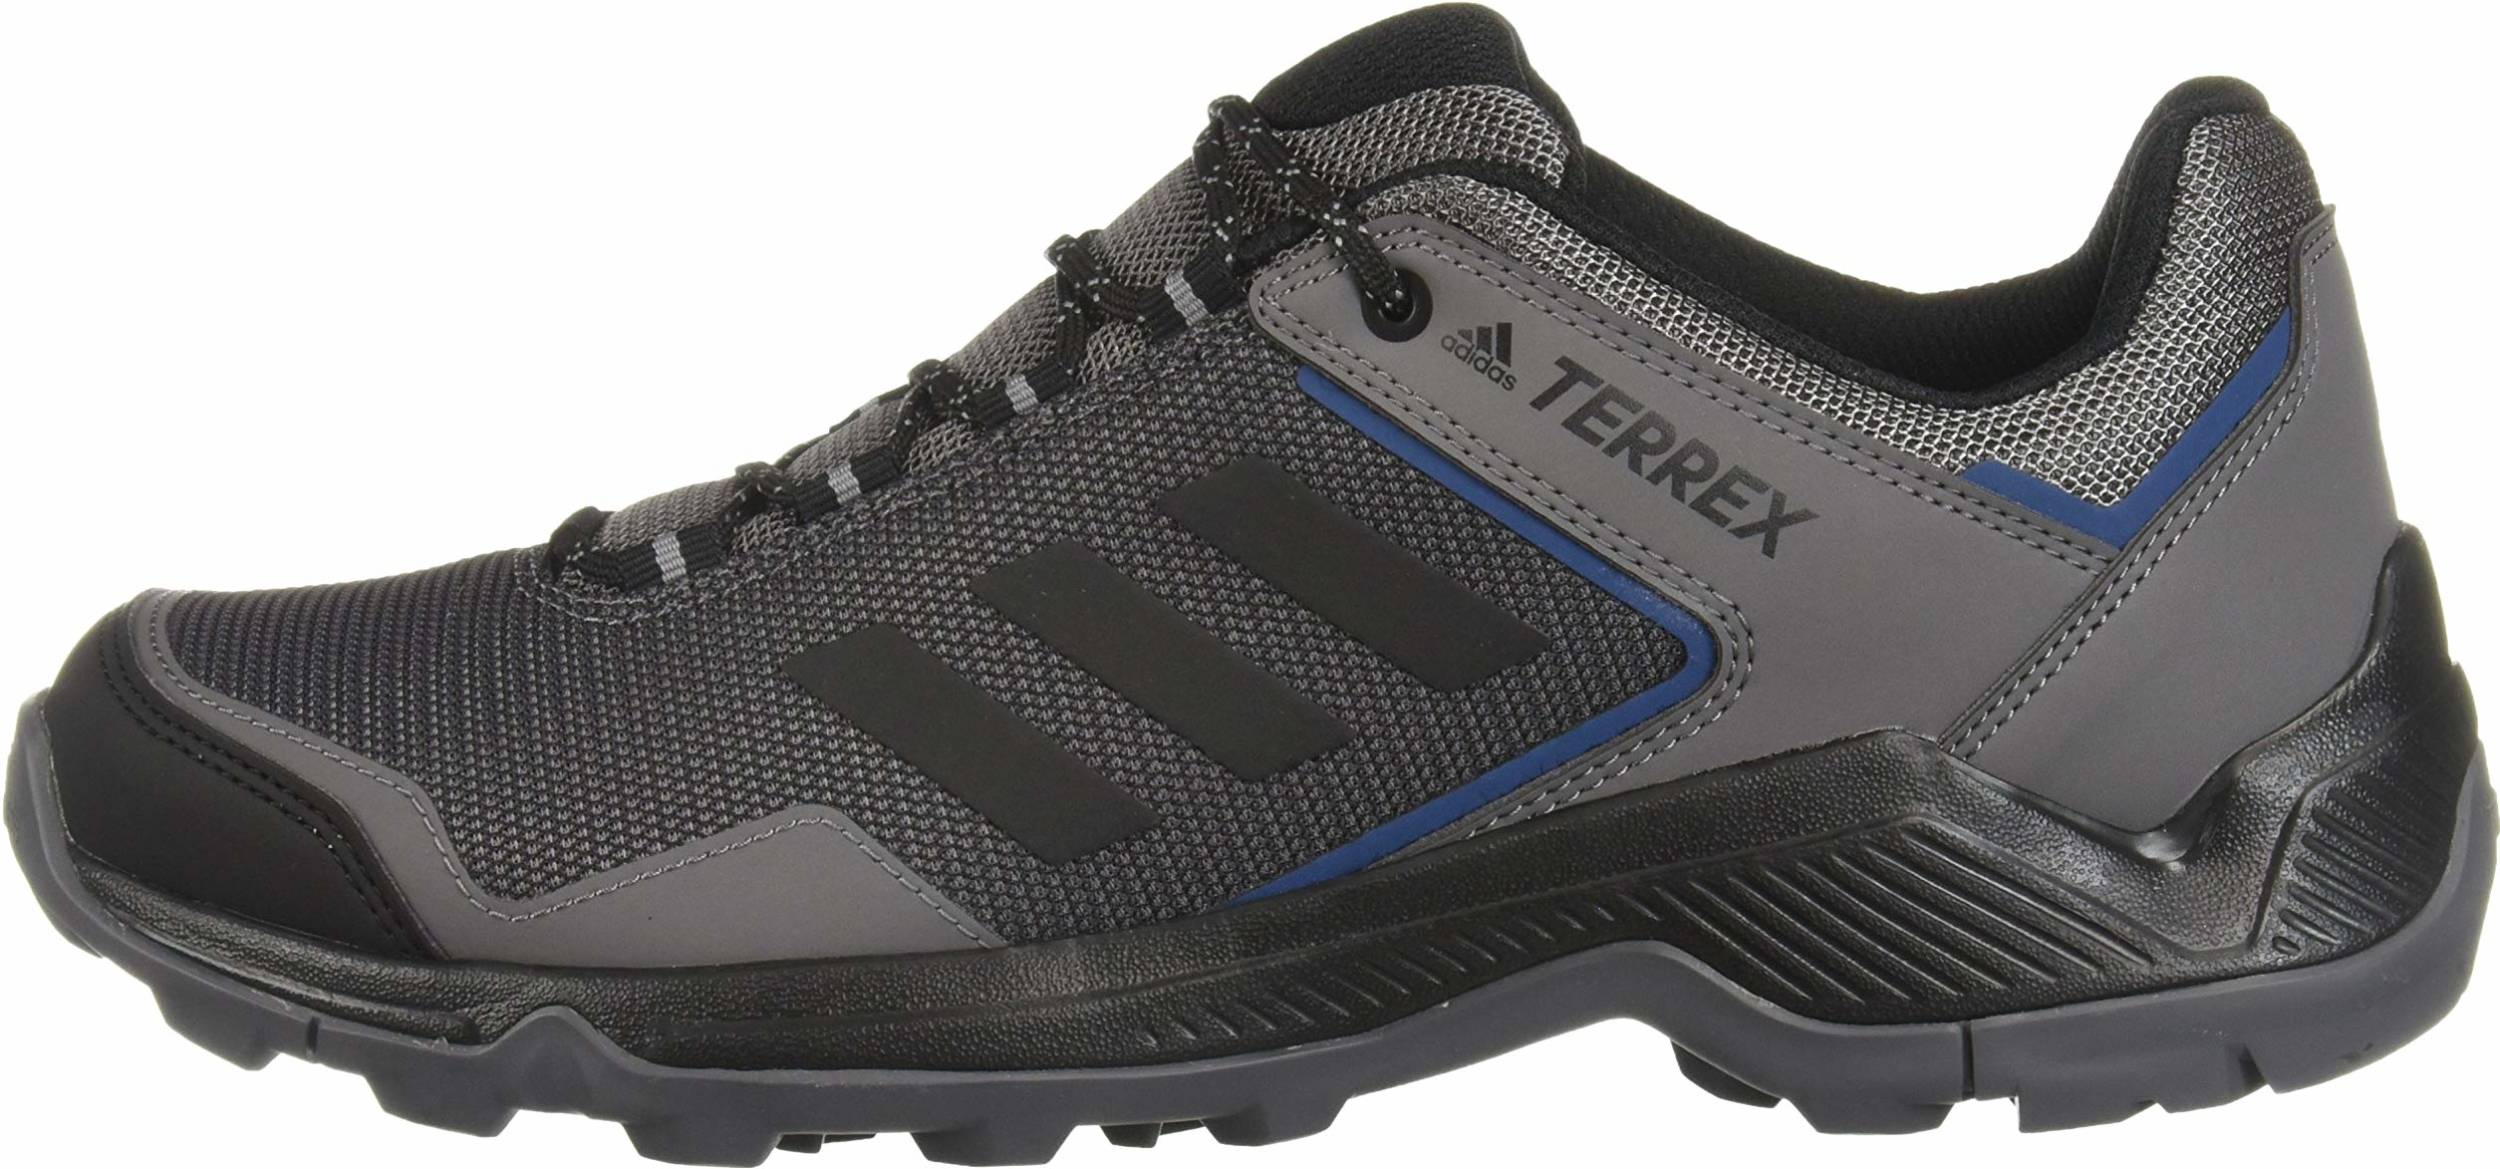 Only $64 + Review of Adidas Terrex Eastrail | RunRepeat